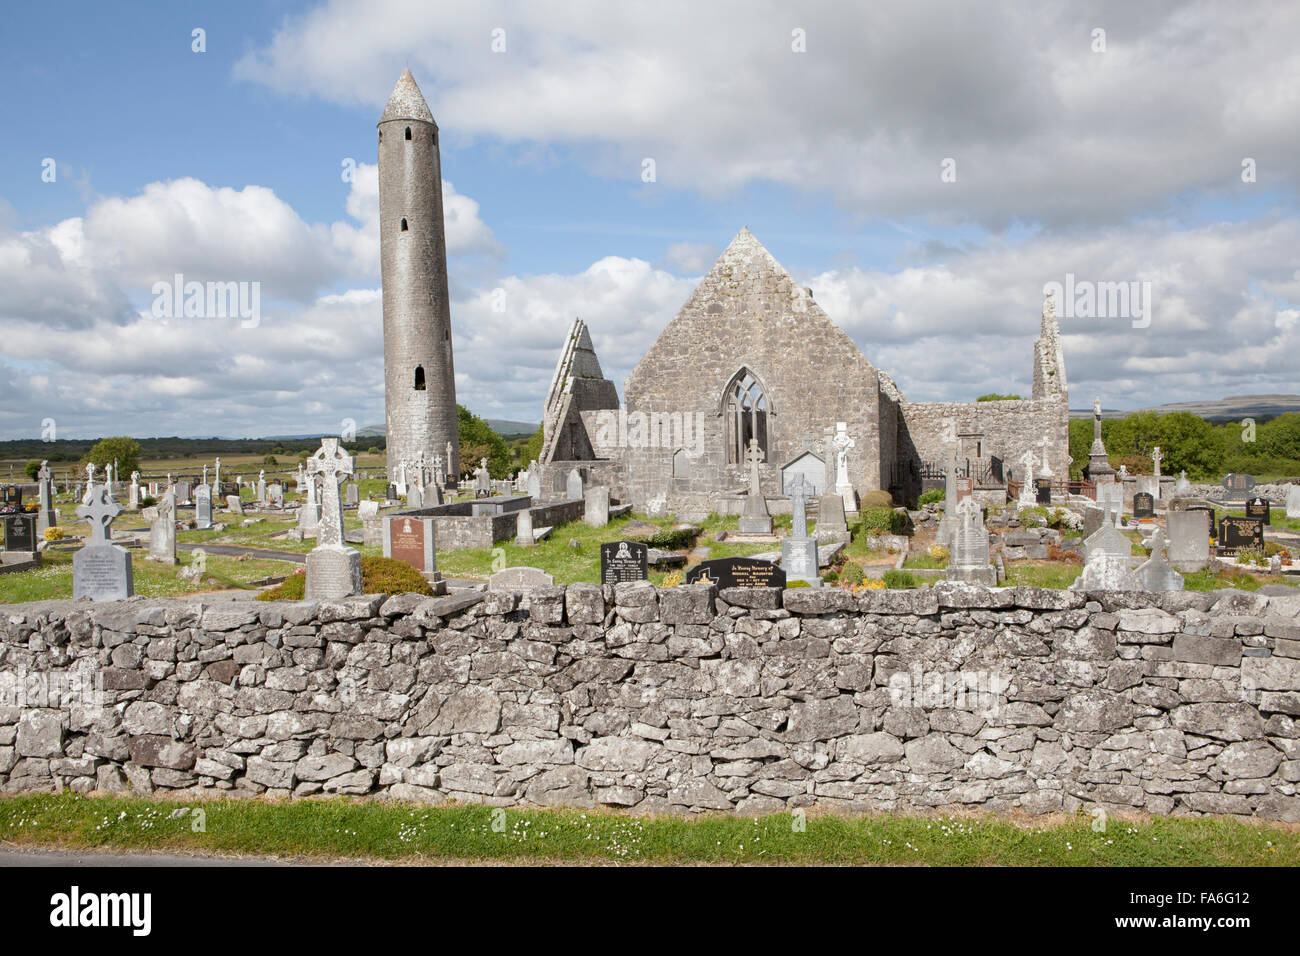 Kilmacduagh Monastery is a ruined abbey near the town of Gort in County Galway, Ireland Stock Photo